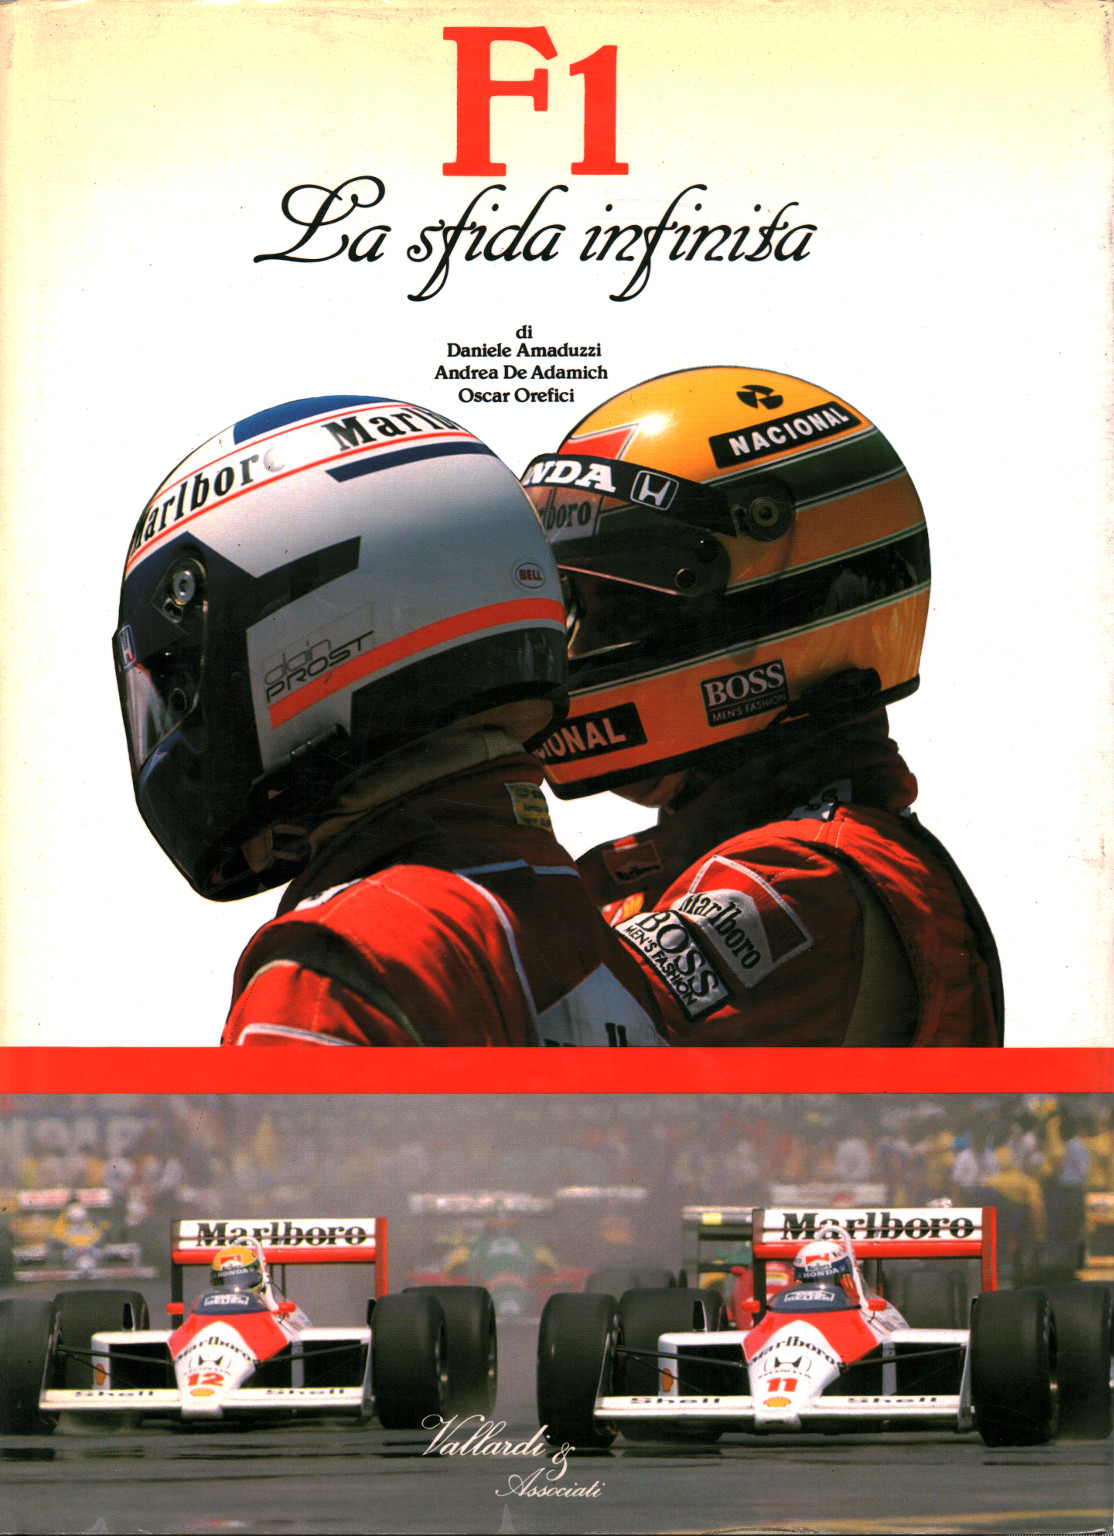 F1-88. The endless challenge, s.a.